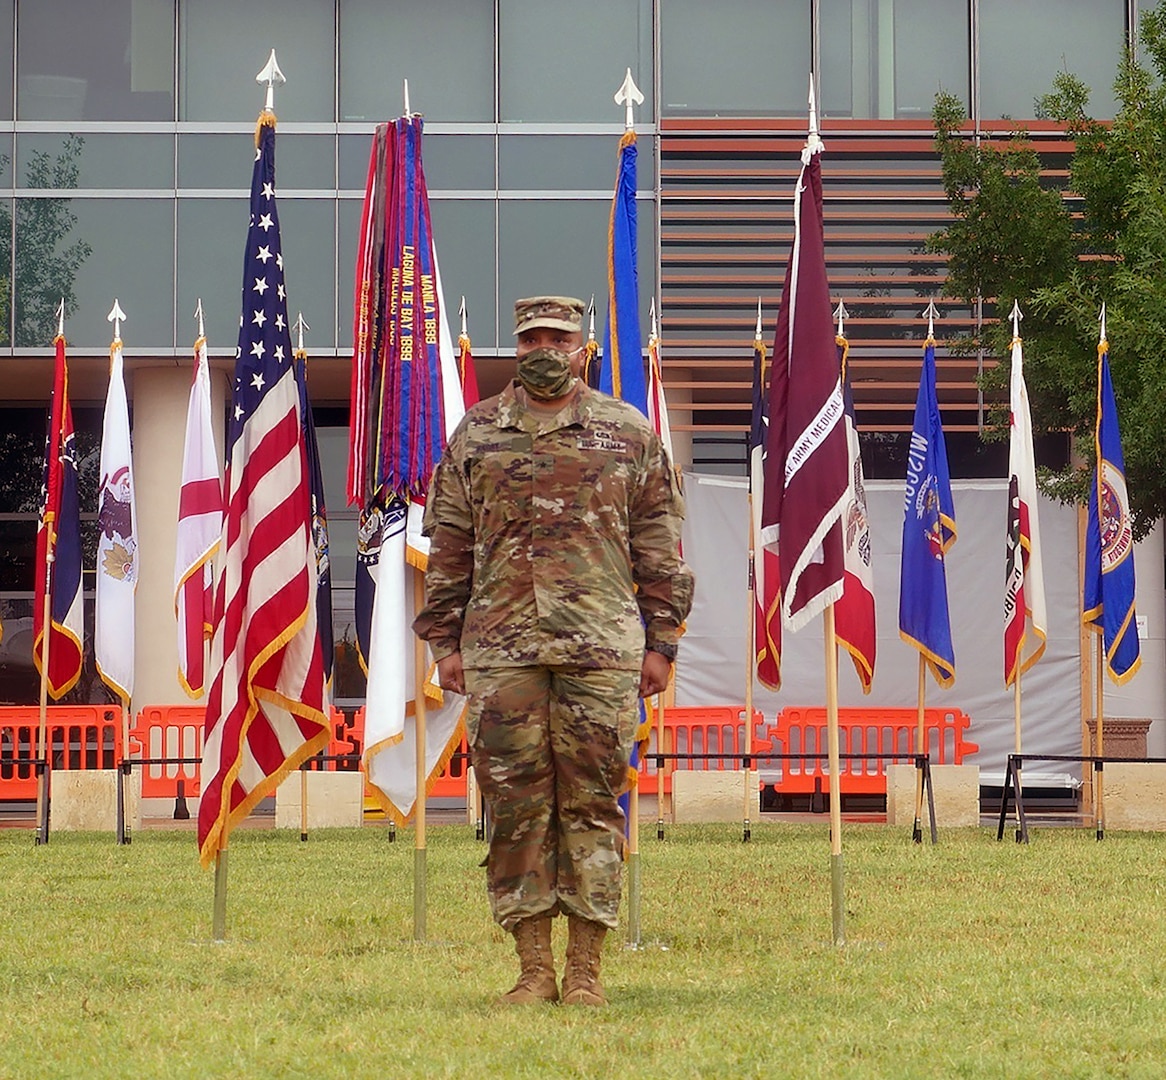 Brig. Gen. Shan K. Bagby is introduced as the new commanding general for Brooke Army Medical Center after a change of command ceremony at Joint Base San Antonio-Fort Sam Houston June 26.